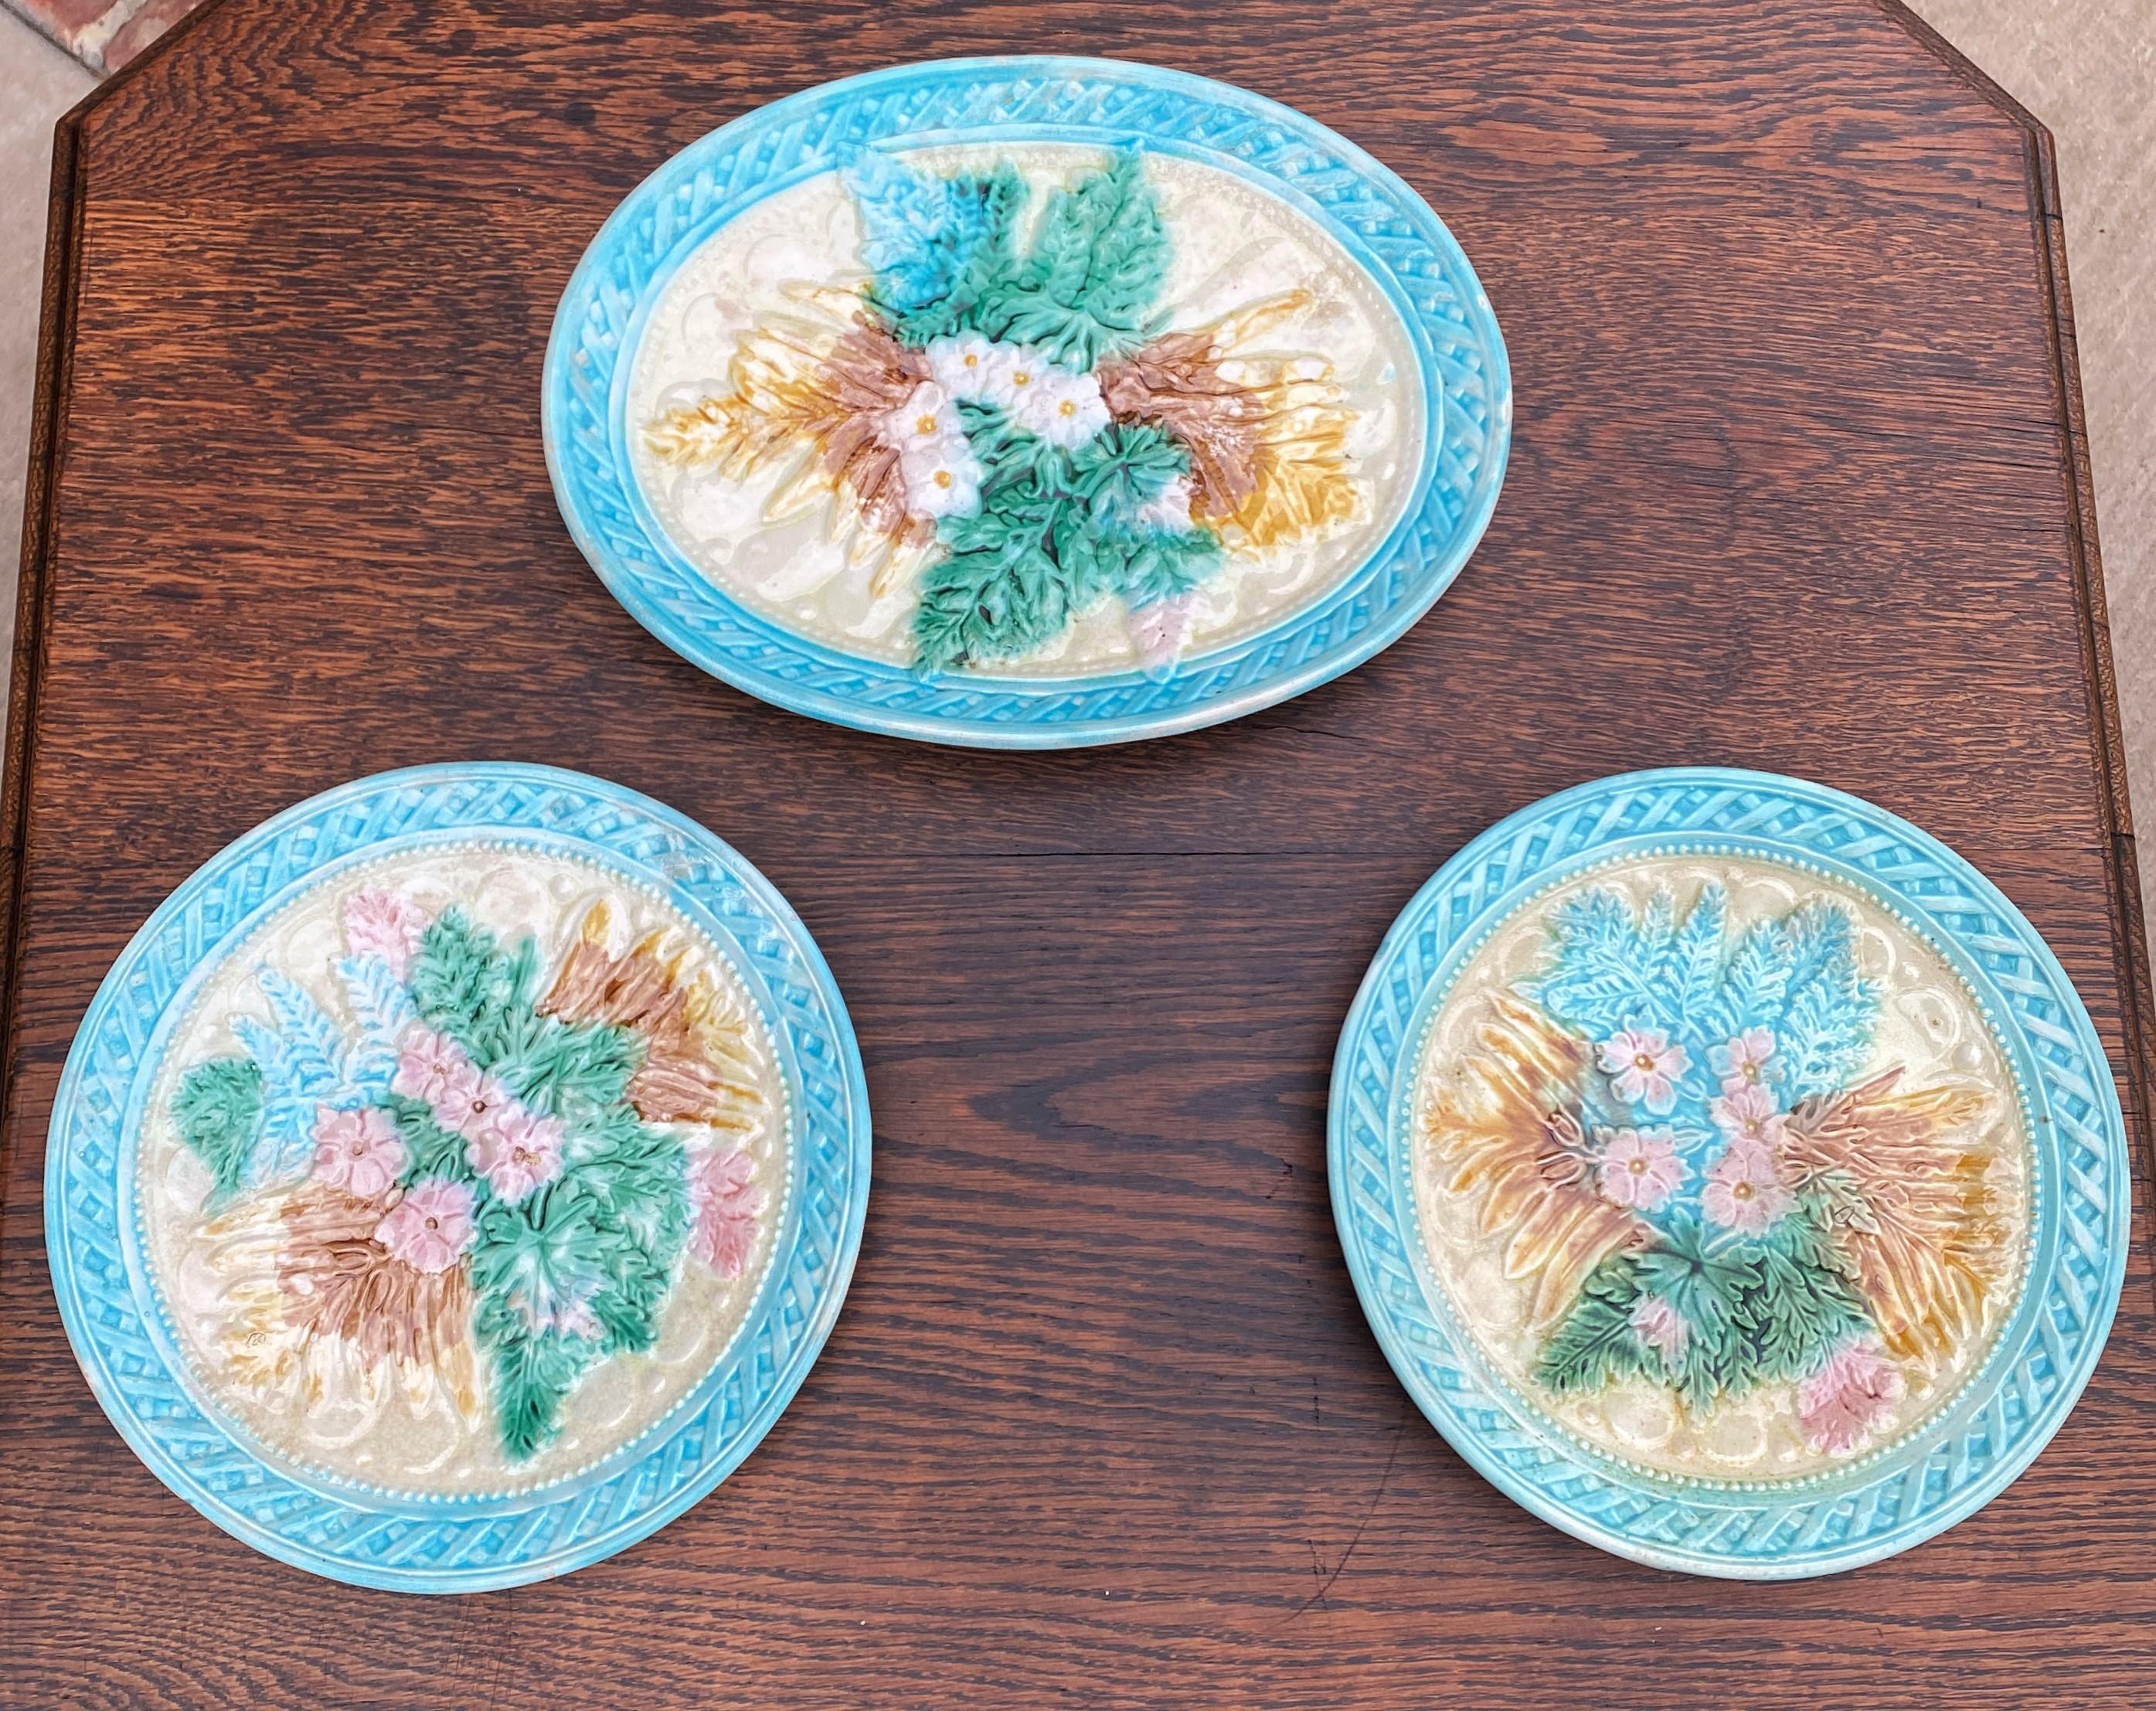 Gorgeous set of 3 antique French majolica plates (2) and platter (1)~~pastel floral design~~c. 1880s-90s

Authentic French majolica set of 2 matching plates and 1 platter~~beautiful pastel blue, pink, green, yellow, and brown floral and leaf